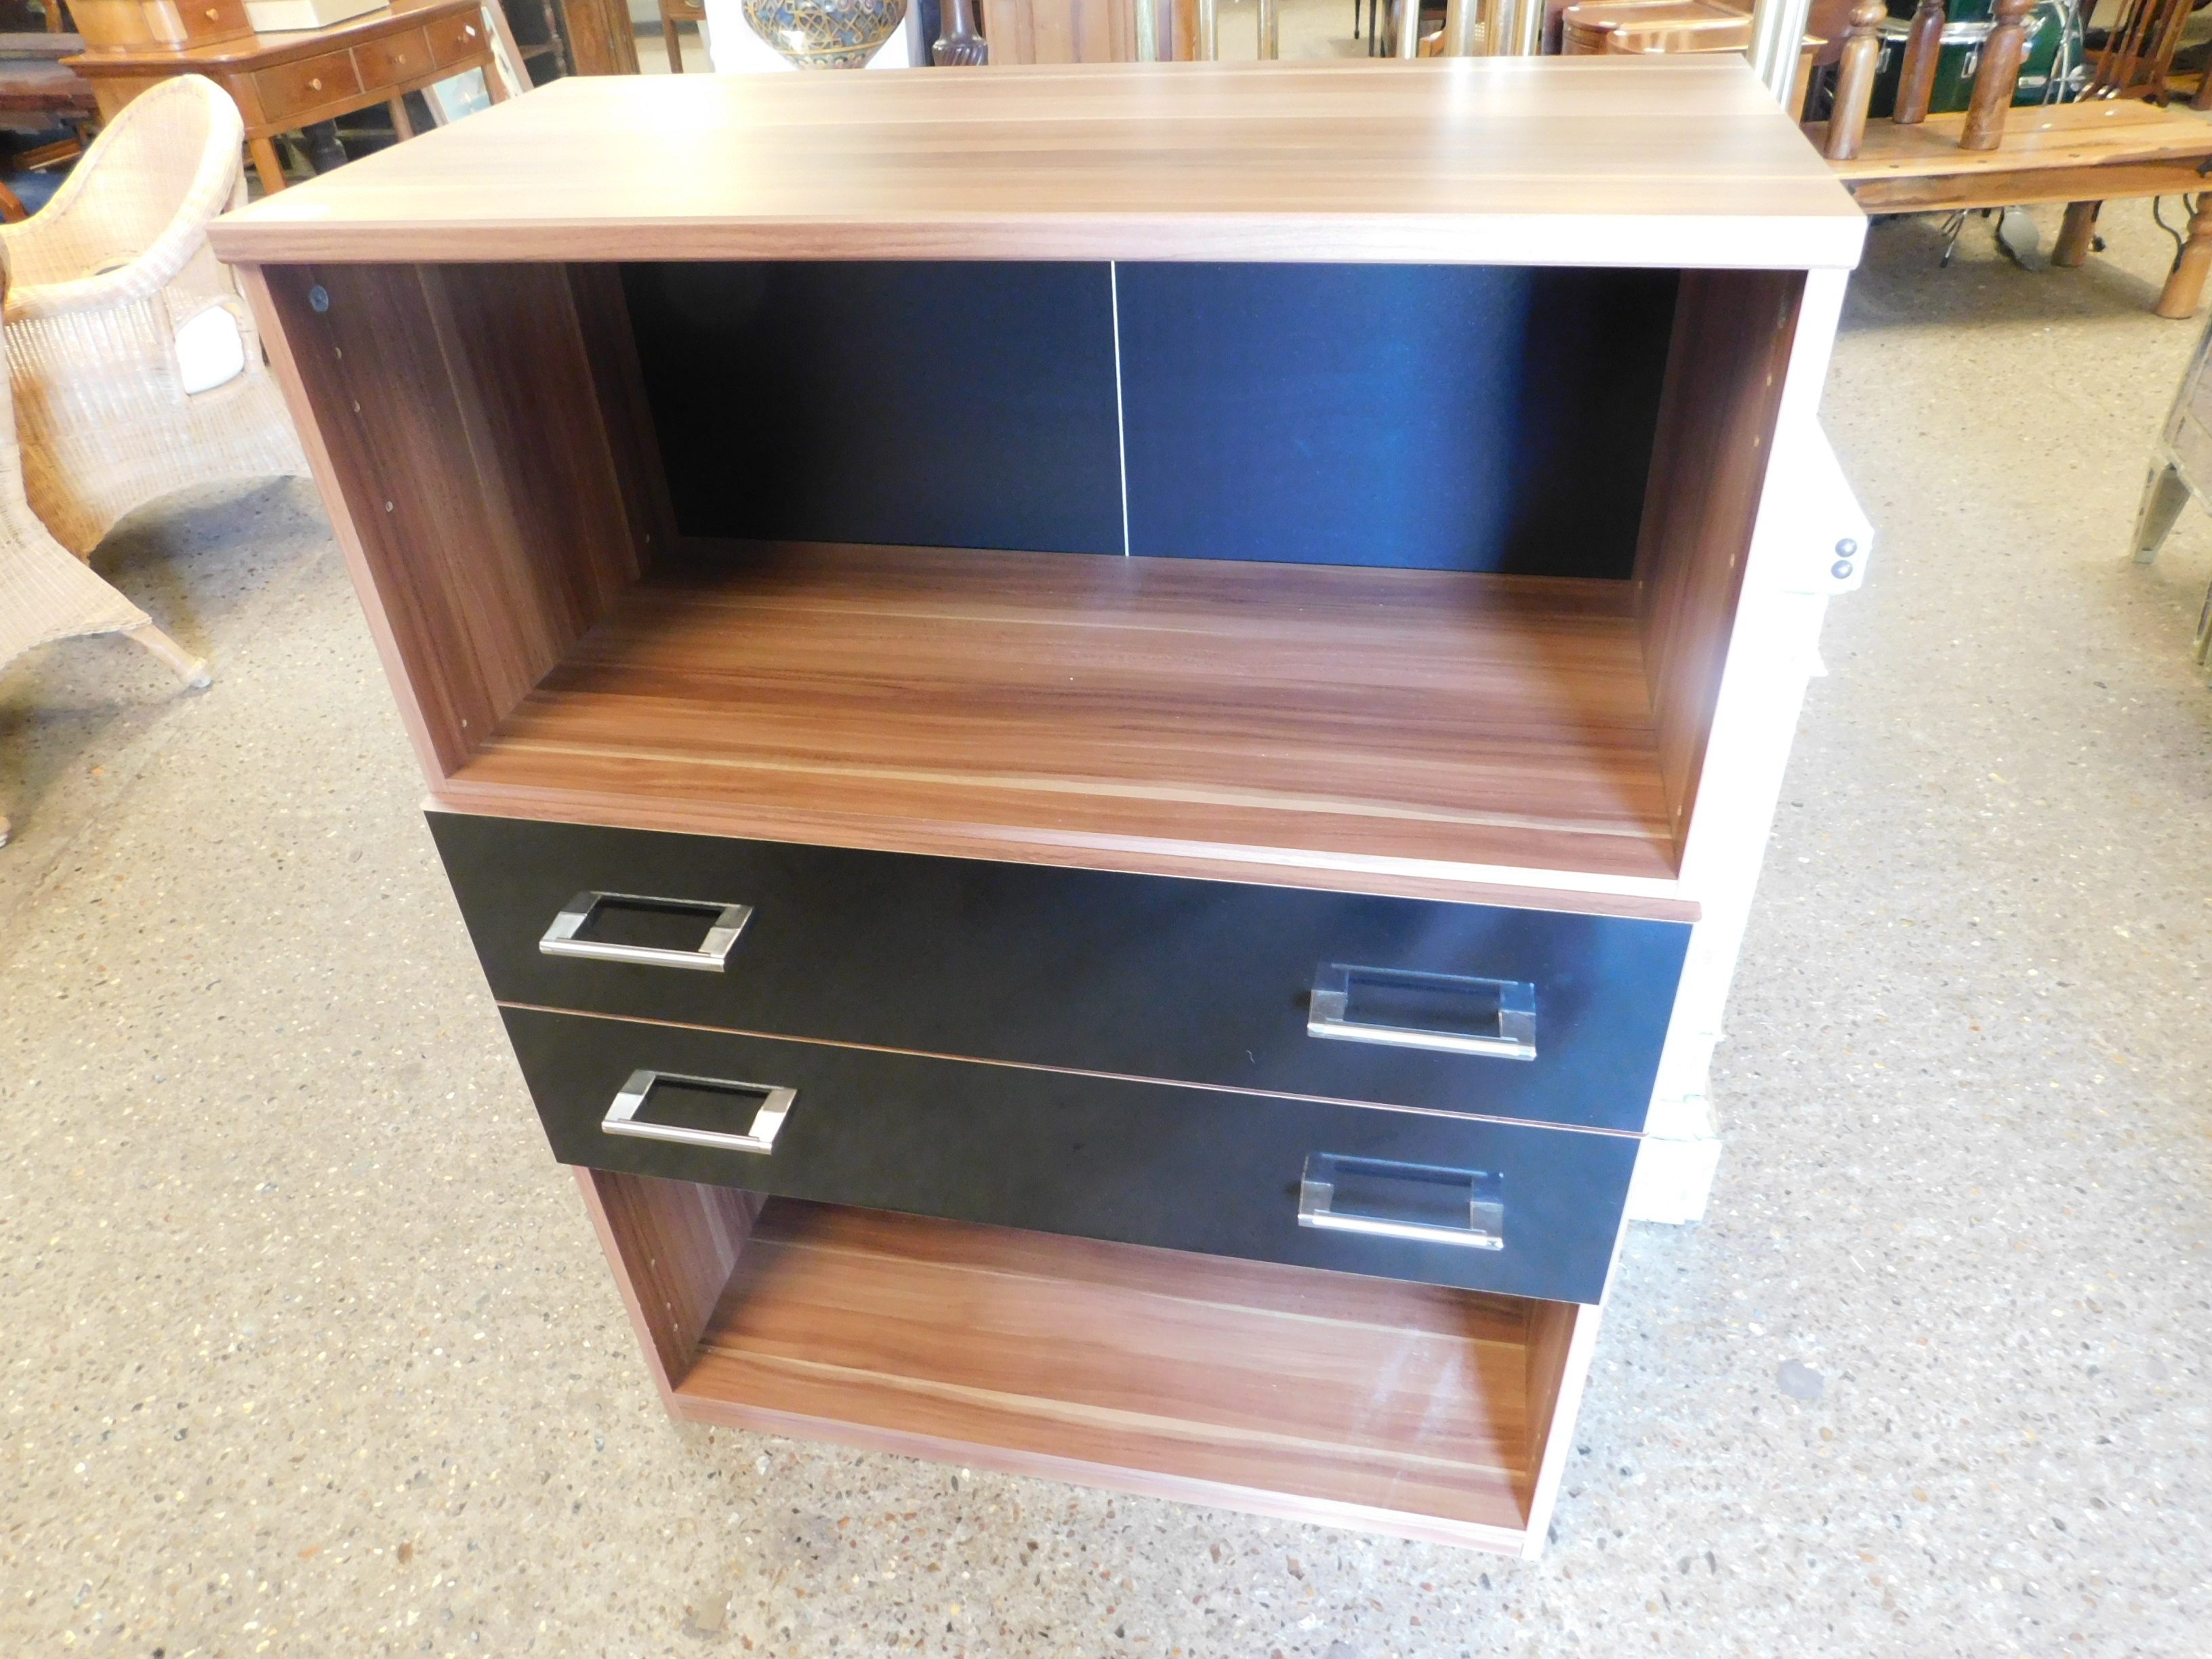 MELAMINE FRONTED BOOKCASE FITTED WITH TWO FULL WIDTH BLACK GLOSS DRAWERS